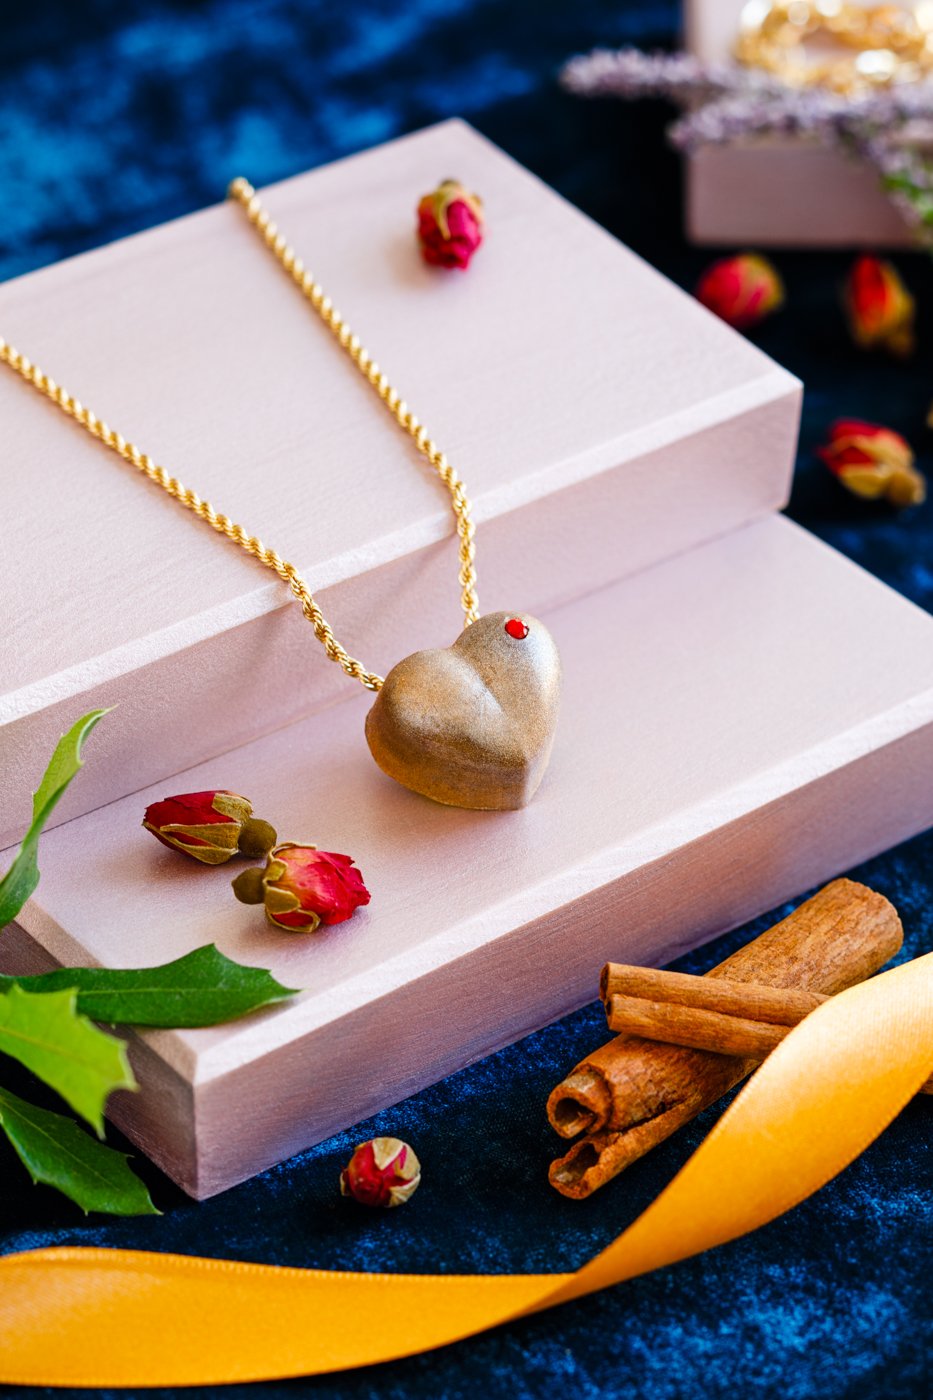 Gift boxes with a gold necklace and heart-shaped chocolate pendant laid across them.